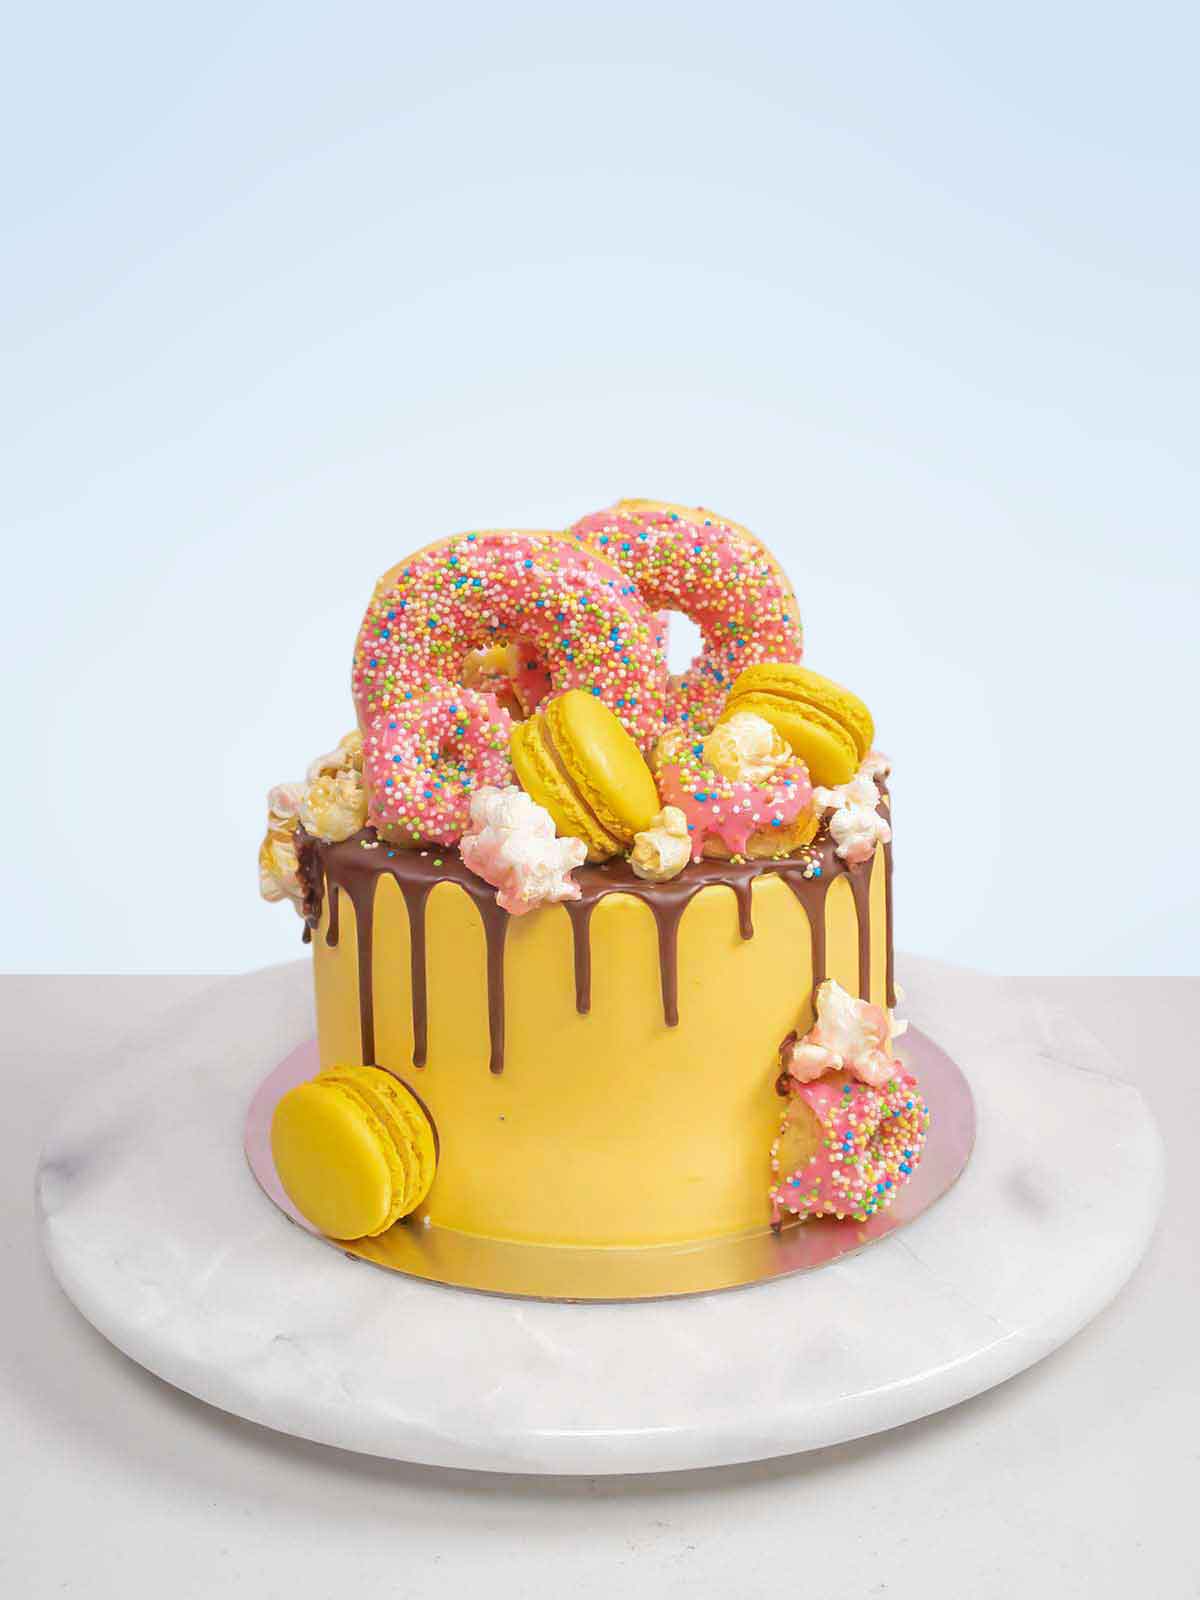 HOW TO MAKE YOUR OWN DONUT WEDDING CAKE STAND | Bespoke-Bride: Wedding Blog